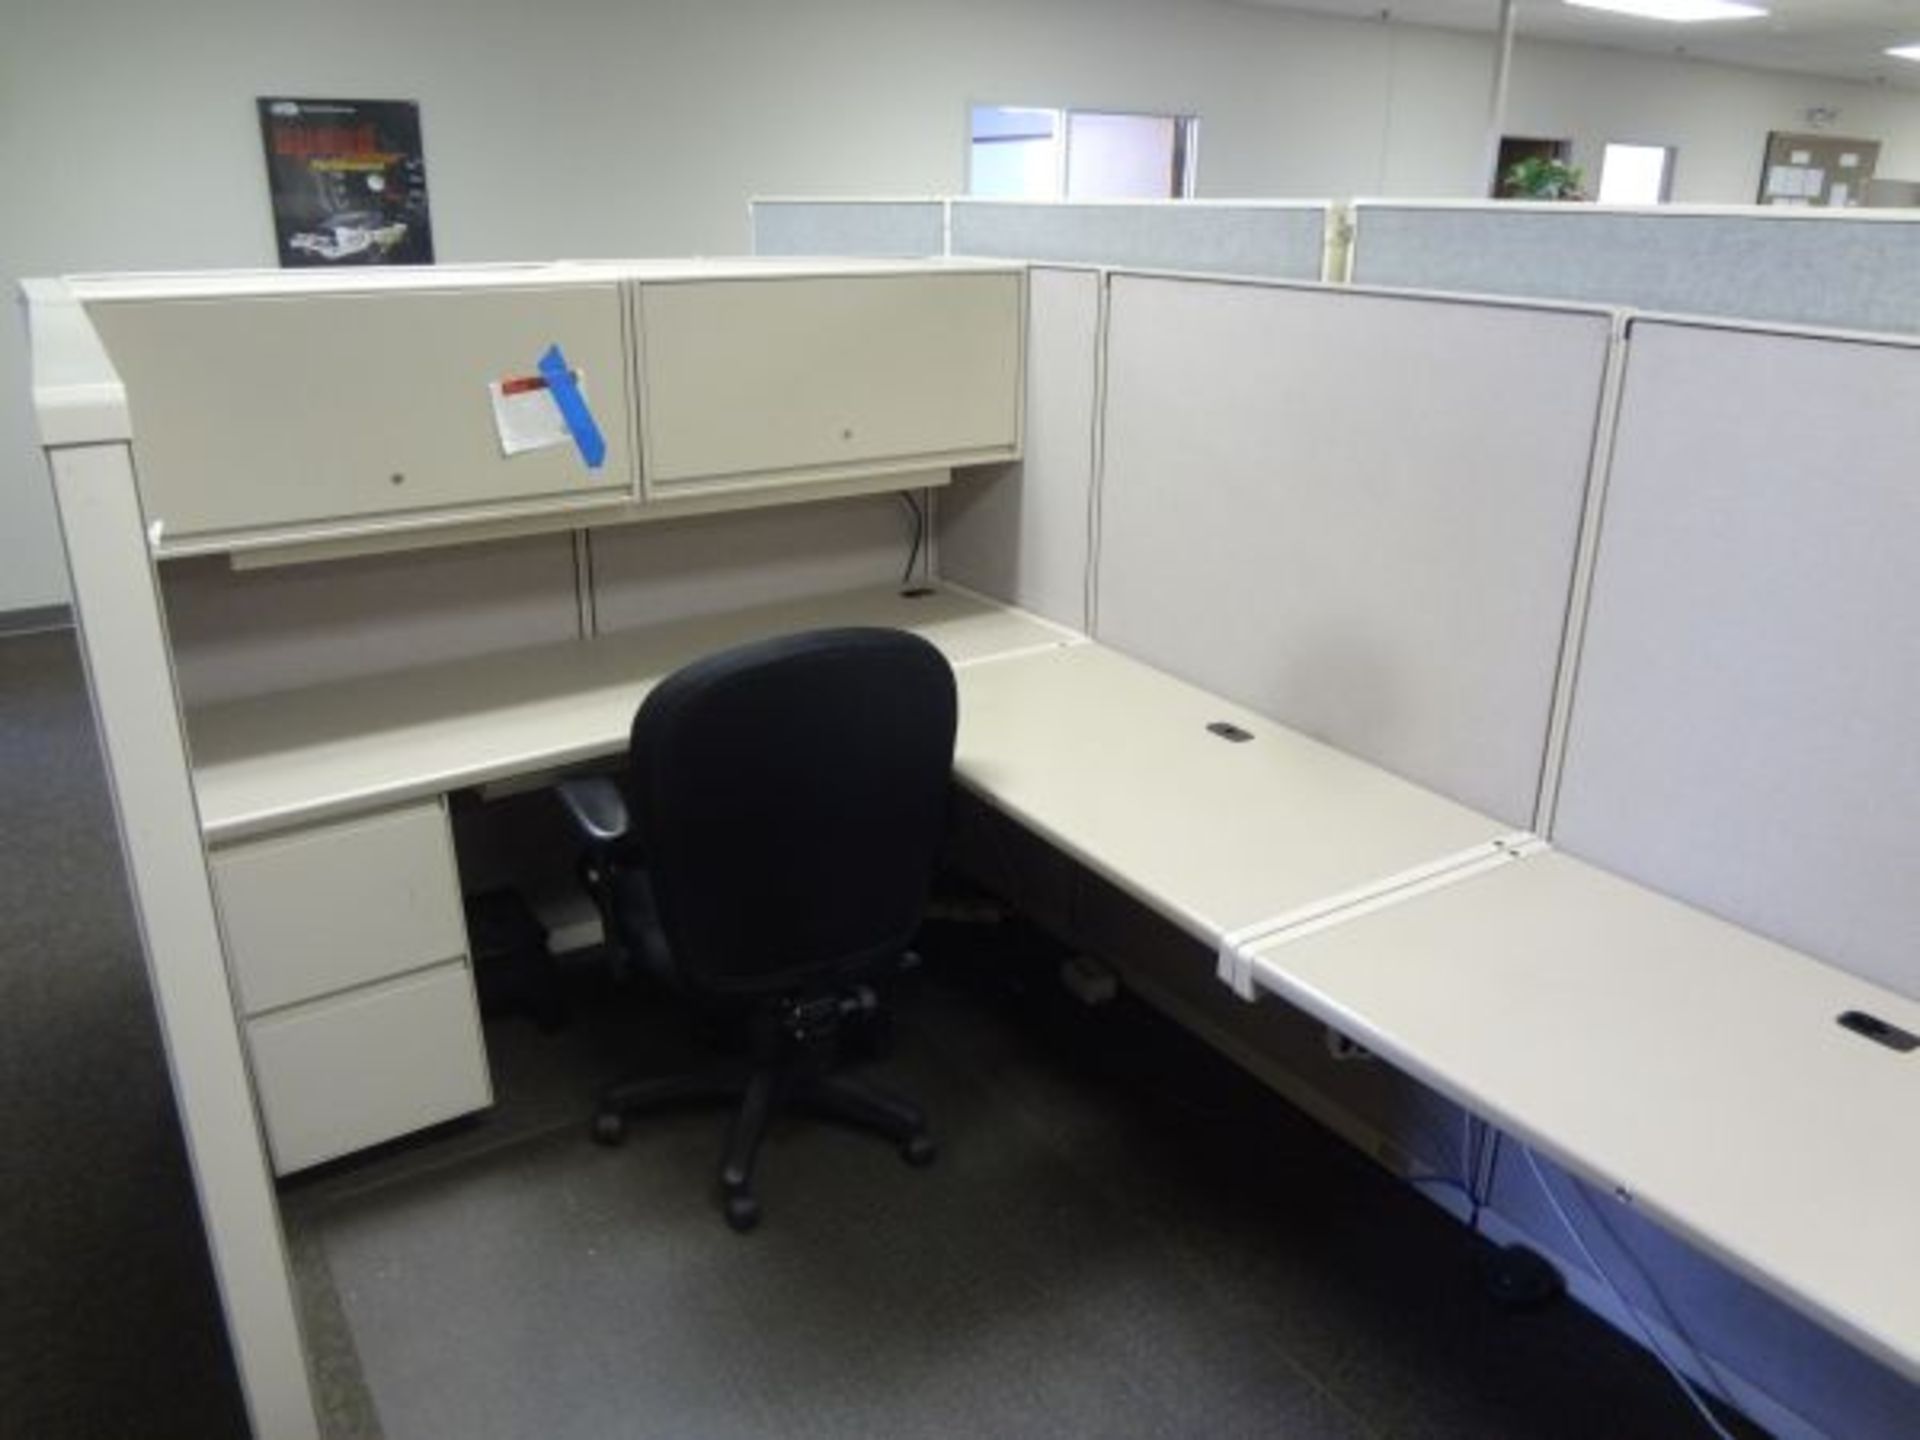 75" X 144" X 61" TWO-PERSON STEELCASE MODULAR OFFICE INCLUDING (4) OVERHEAD CABINETS, (2) 2-DRAWER - Image 2 of 3